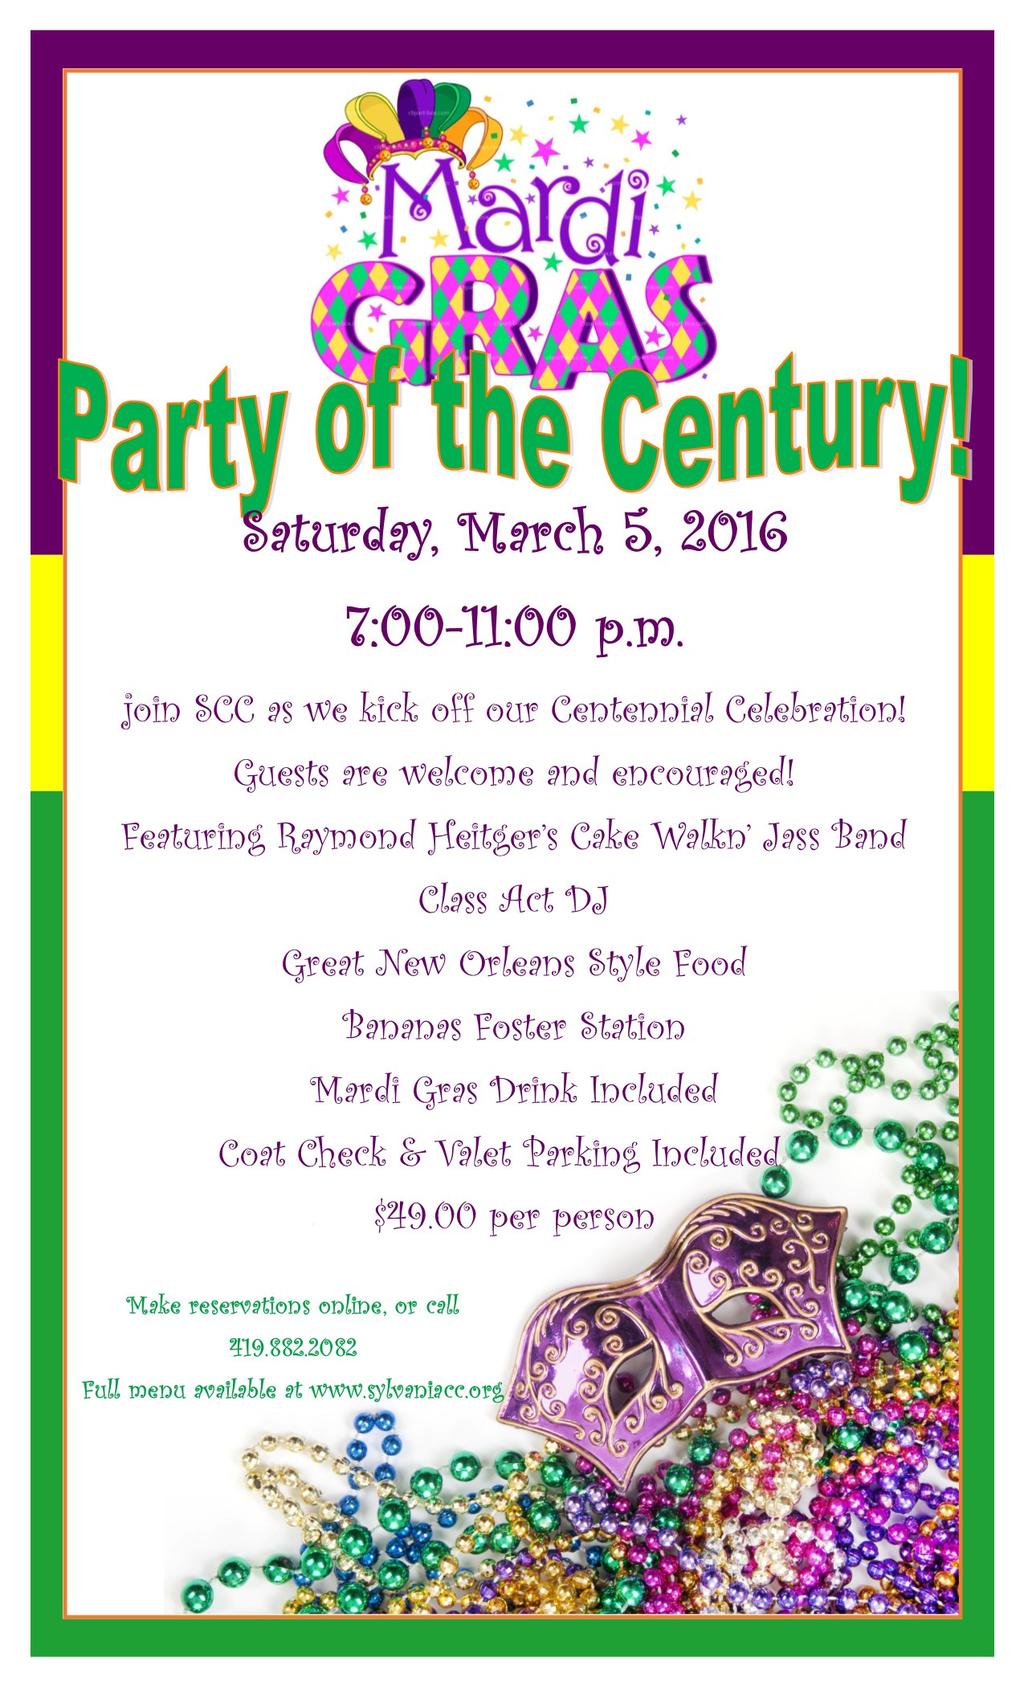 Mardi Gras Menu Cheesy Shrimp Canapes Creole deviled eggs Seafood Gumbo Mardi Gras Cabbage Salad Black-eyed Pea Salad Crab Cakes with Spicy Rémoulade Carved Cajun Beef Tenderloin with Cheddar